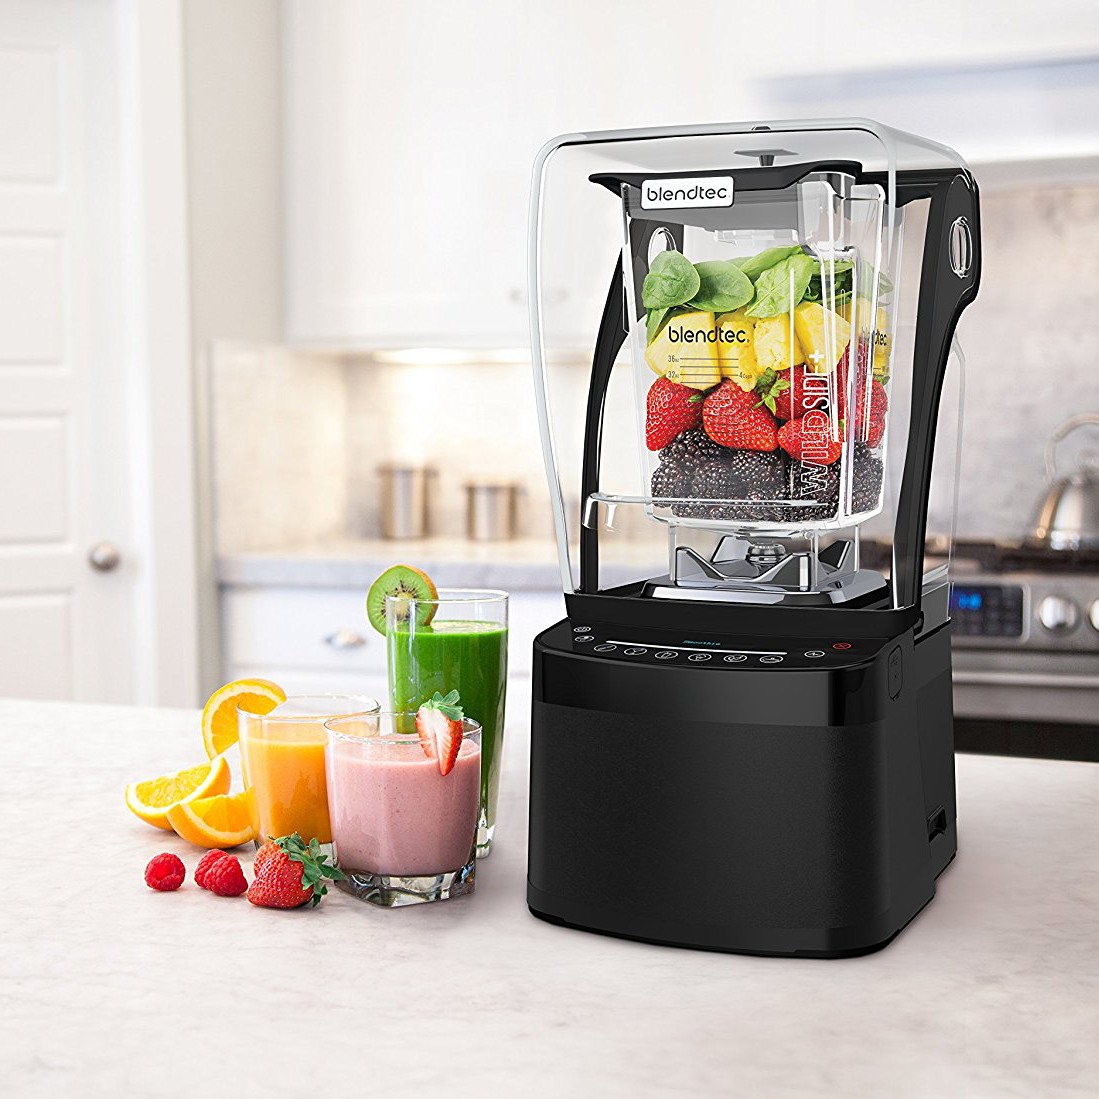 https://assets.quenchessentials.com/media/images/products/blendtec-professional-800-blender-lifestyle.jpg